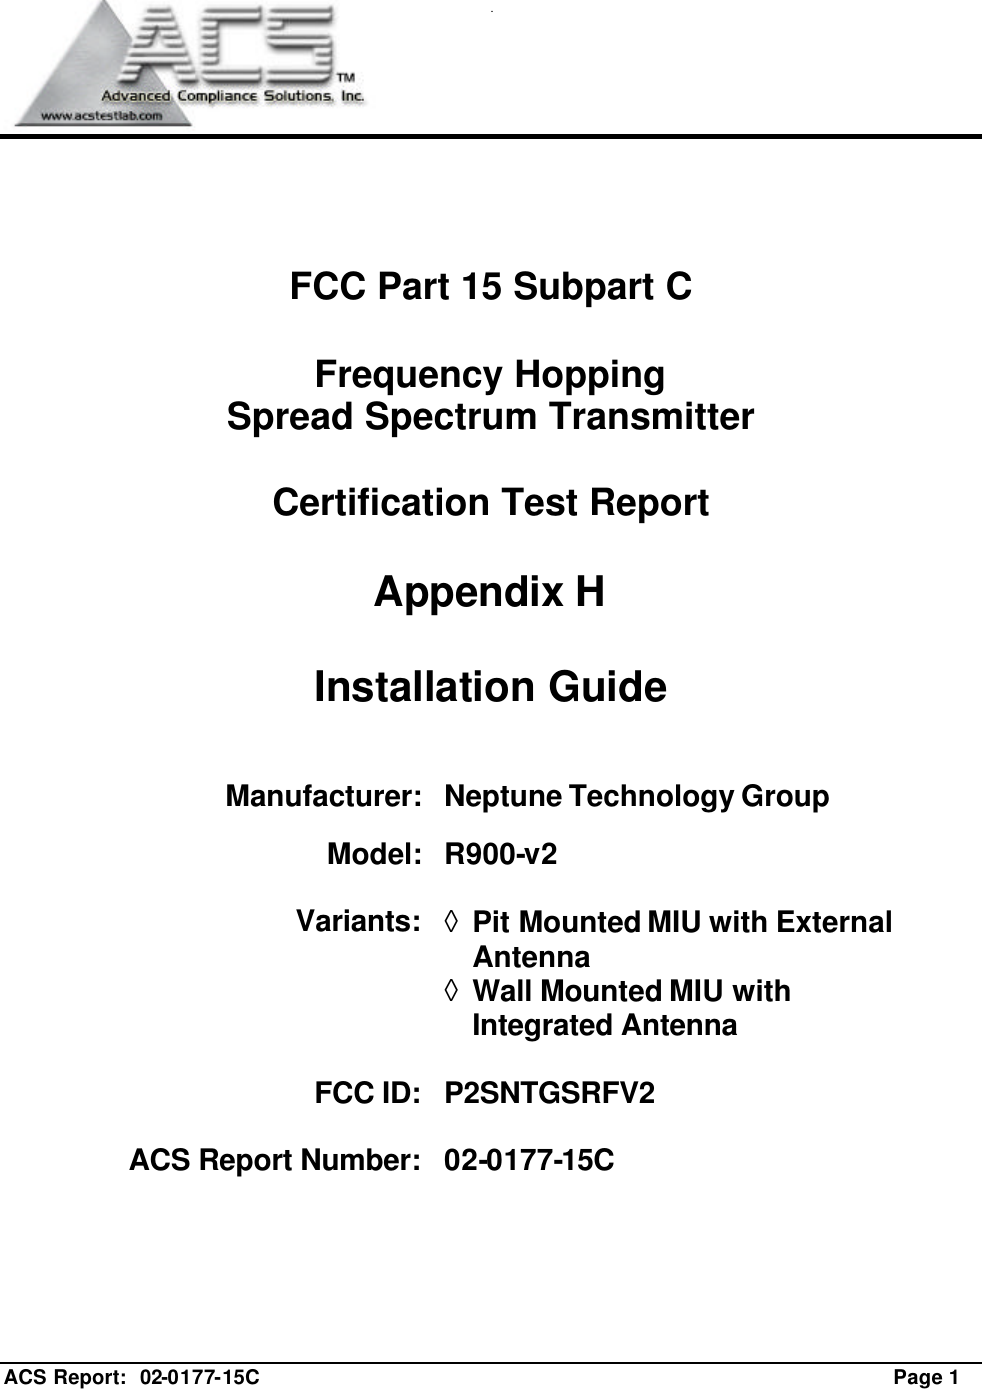  ACS Report:  02-0177-15C                                                                                                             Page 1      FCC Part 15 Subpart C  Frequency Hopping  Spread Spectrum Transmitter  Certification Test Report  Appendix H  Installation Guide    Manufacturer:  Neptune Technology Group  Model:  R900-v2  Variants: ◊ Pit Mounted MIU with External Antenna ◊ Wall Mounted MIU with Integrated Antenna  FCC ID:  P2SNTGSRFV2  ACS Report Number:  02-0177-15C        